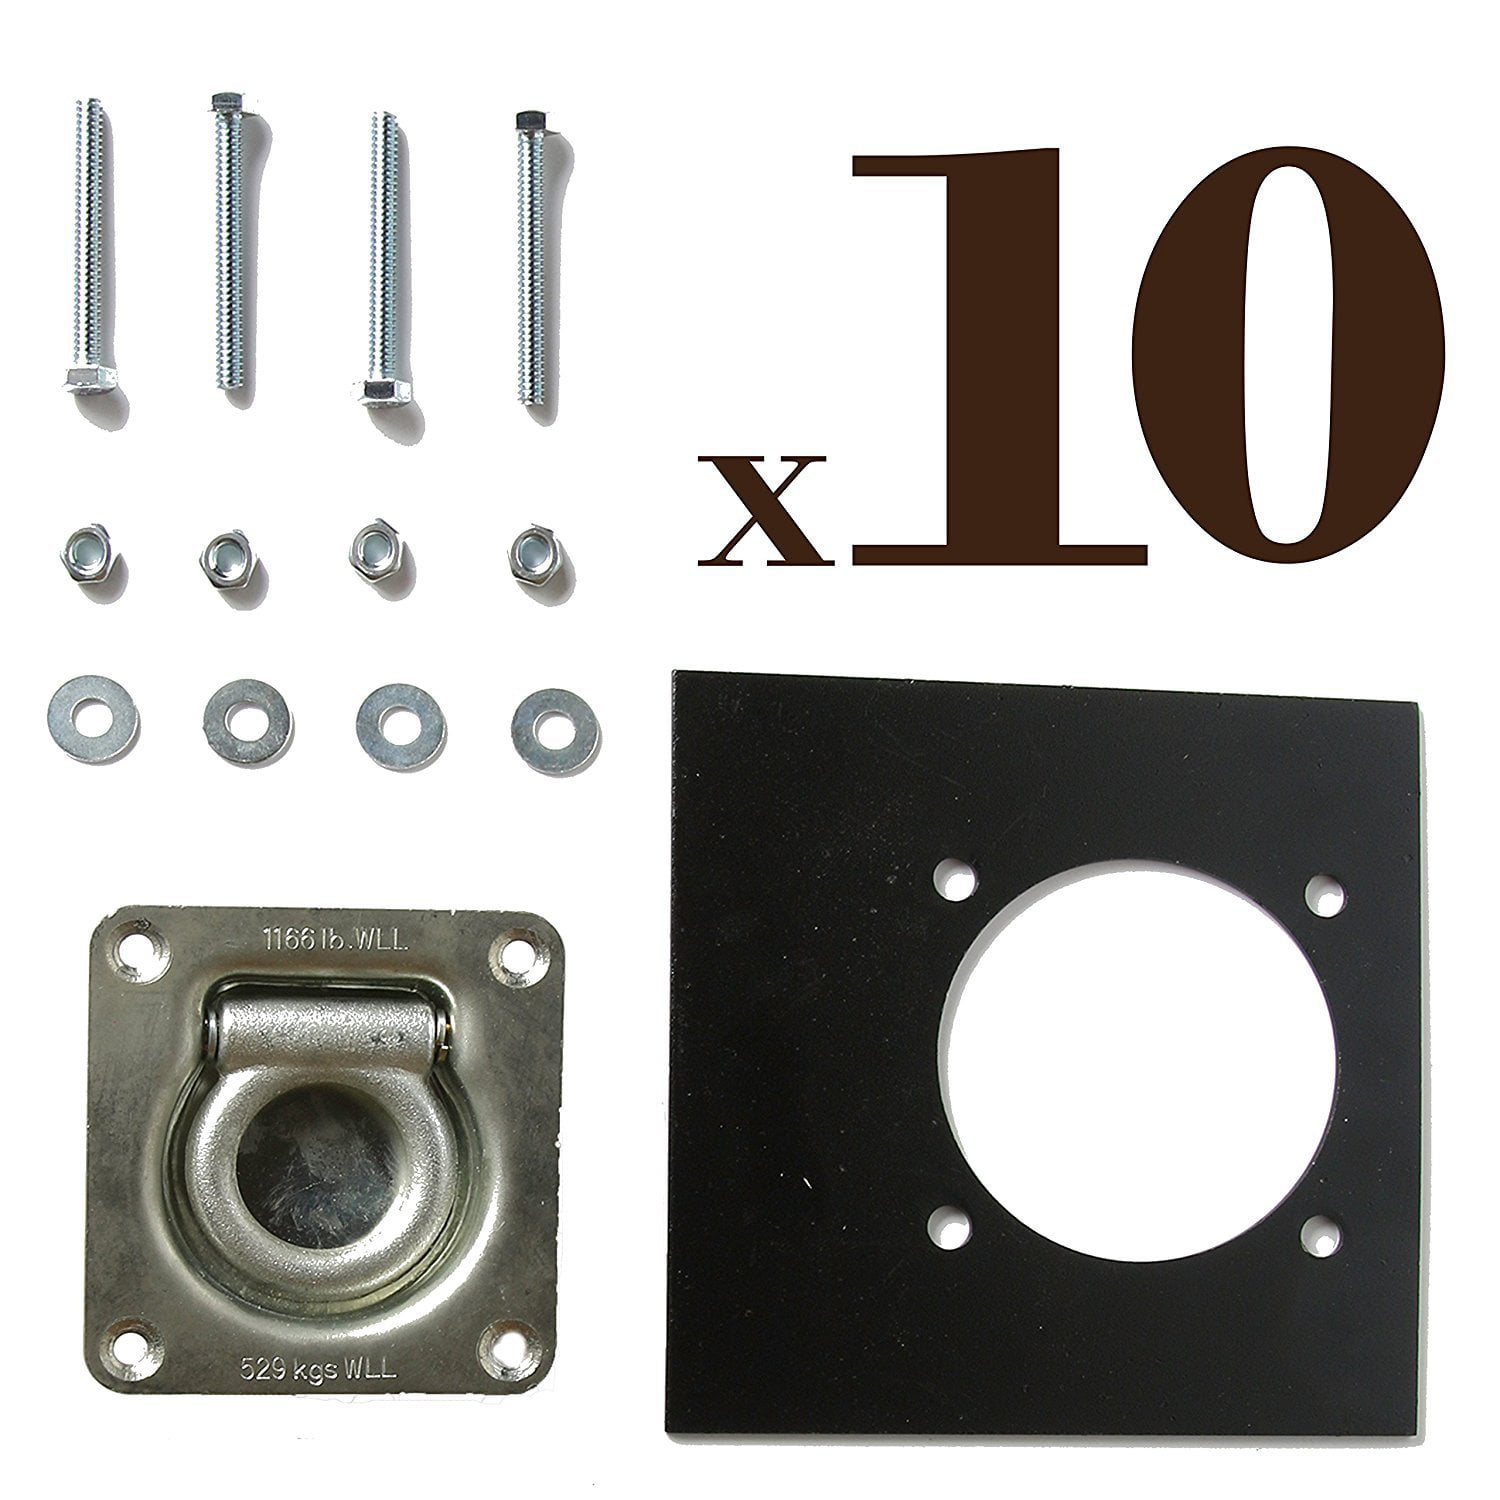 Ten Recessed D Ring Pan Fittings Small Square Tie Down D Ring Trailer Cargo Tiedown Anchors Mounting Lock Plates Installation Tie Down Hardware Parts Carriage Bolts Keps Nuts Flat Washers